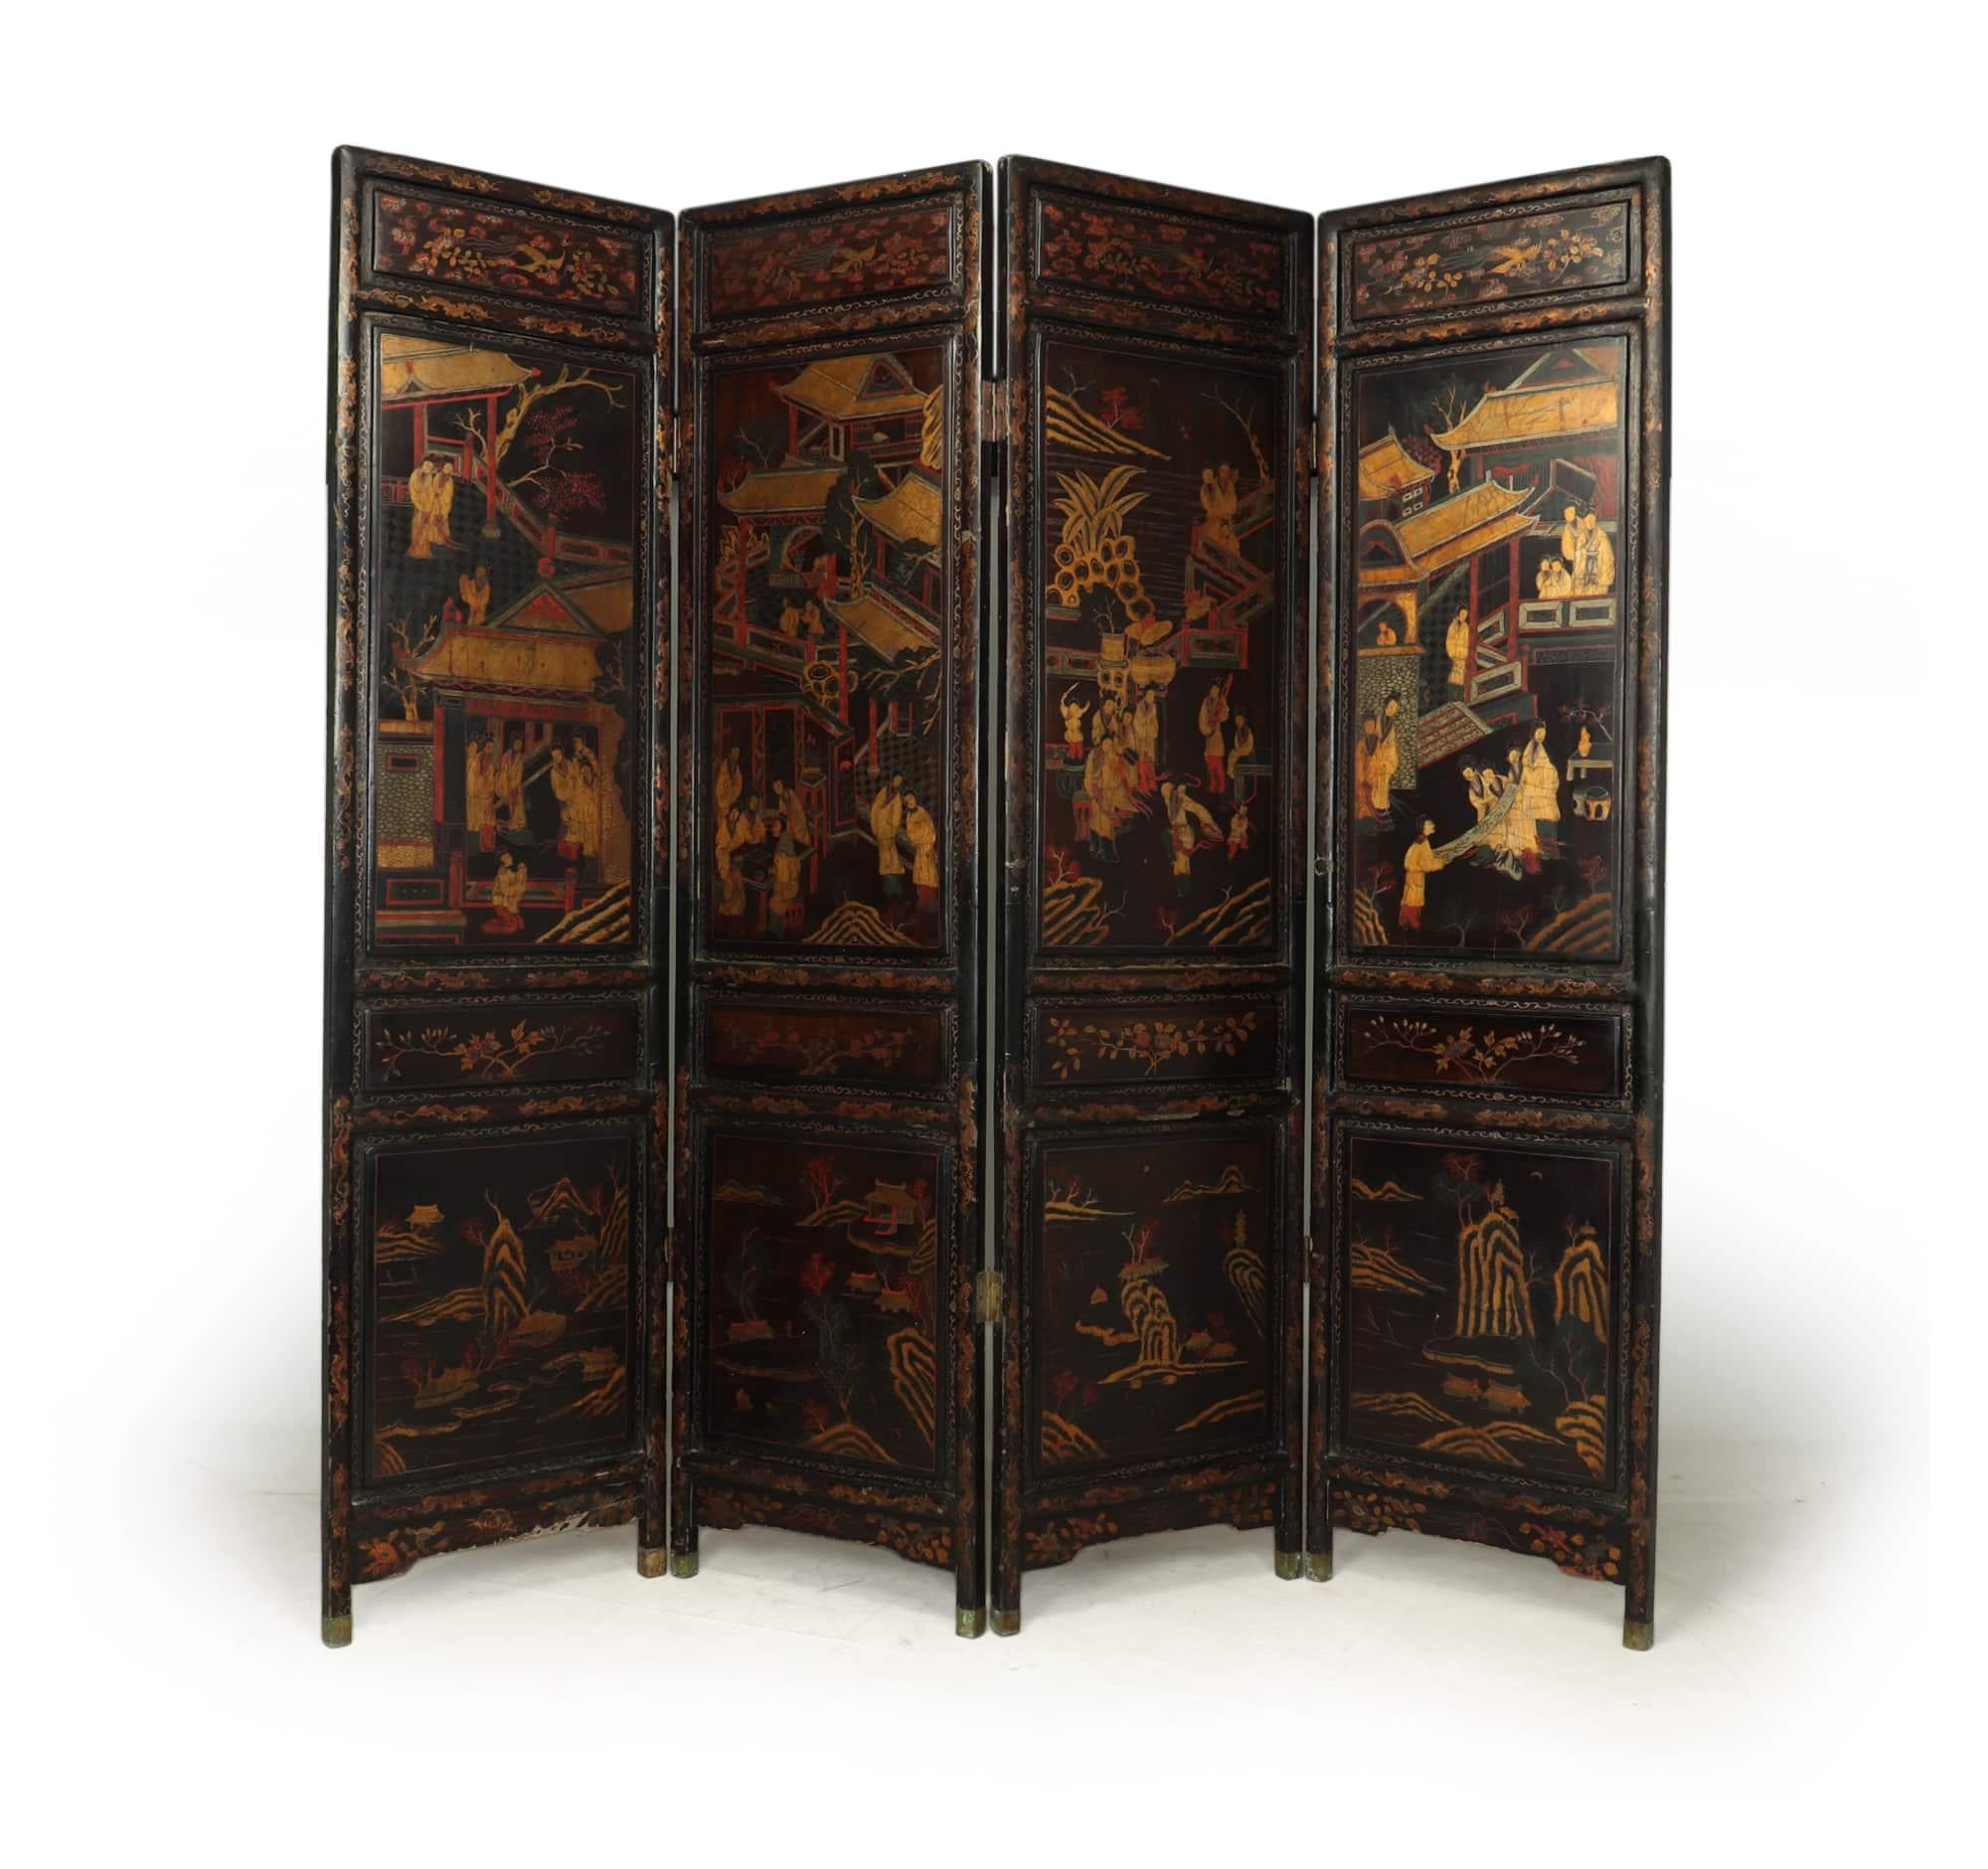 A Chinese Antique four-fold screen dated from around c1840 decorated both sides, the front panels are finely painted and decorated with gold leaf with scenes of figures in pavilions, birds and oriental gardens this is surrounded with dragons on the